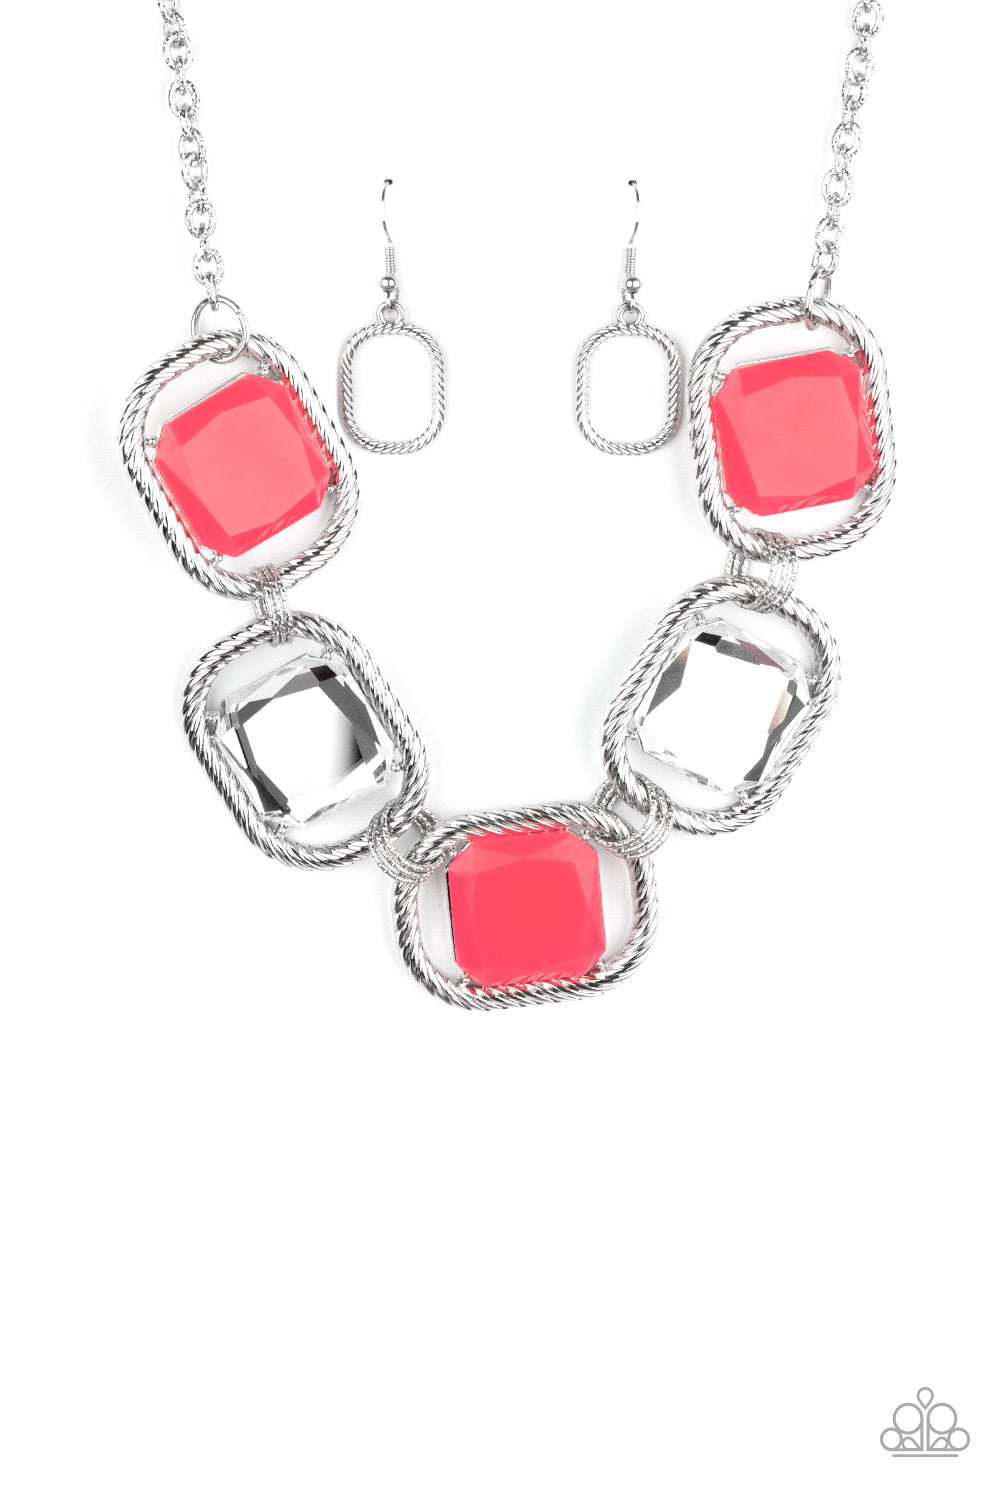 Pucker Up Necklace - Pink